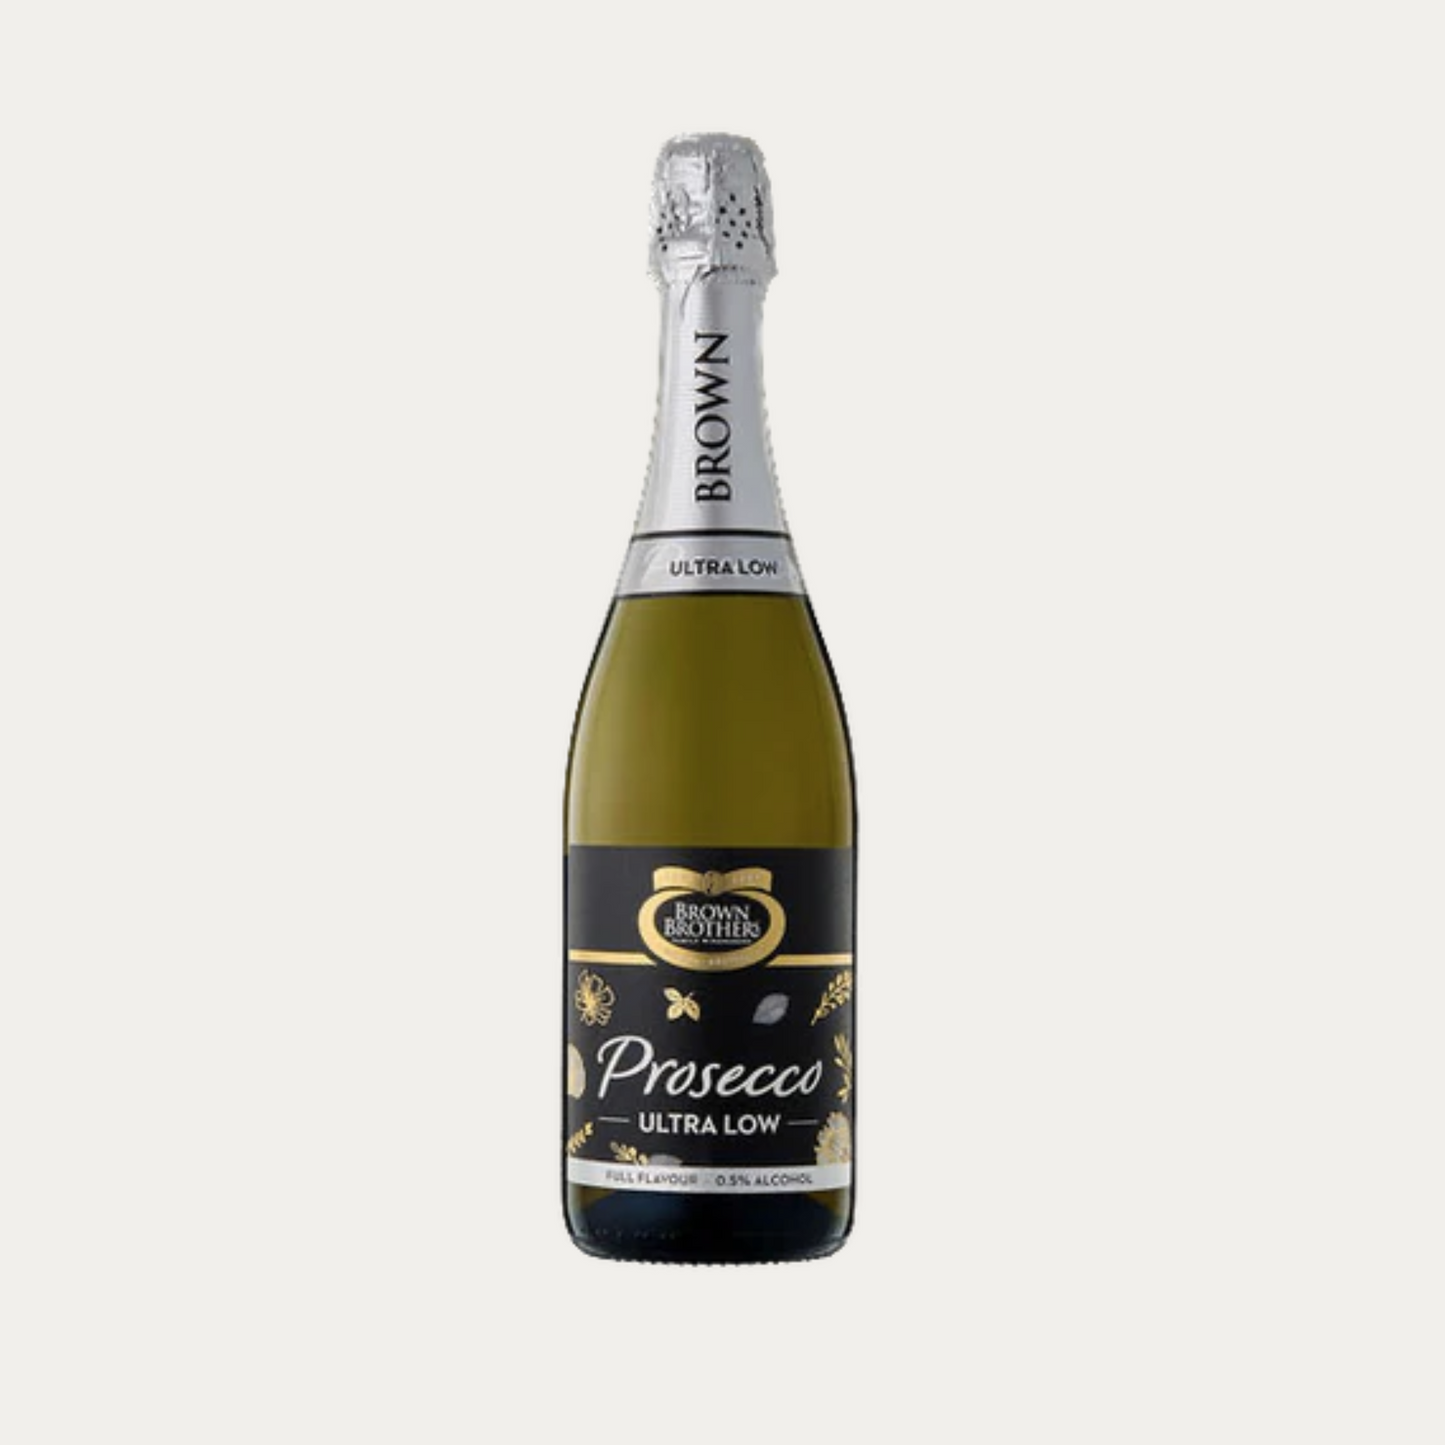 Brown Brothers 'Ultra Low' Prosecco